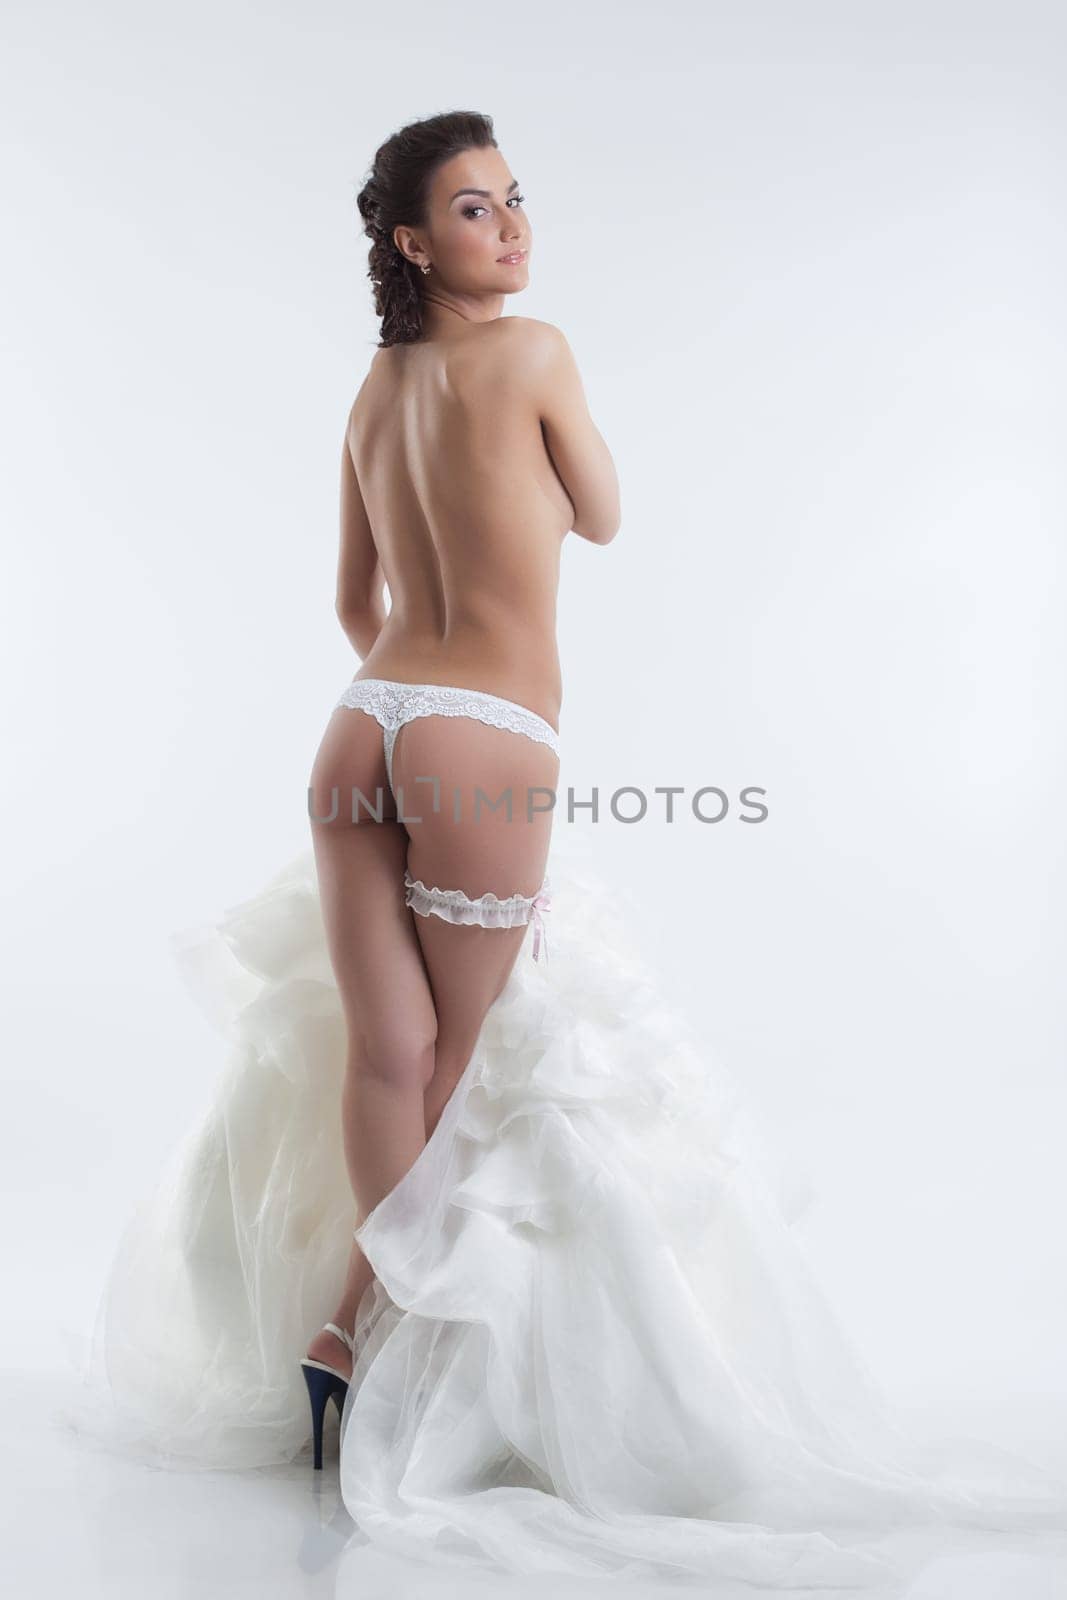 Sexy bride in lingerie posing back to camera, isolated on white